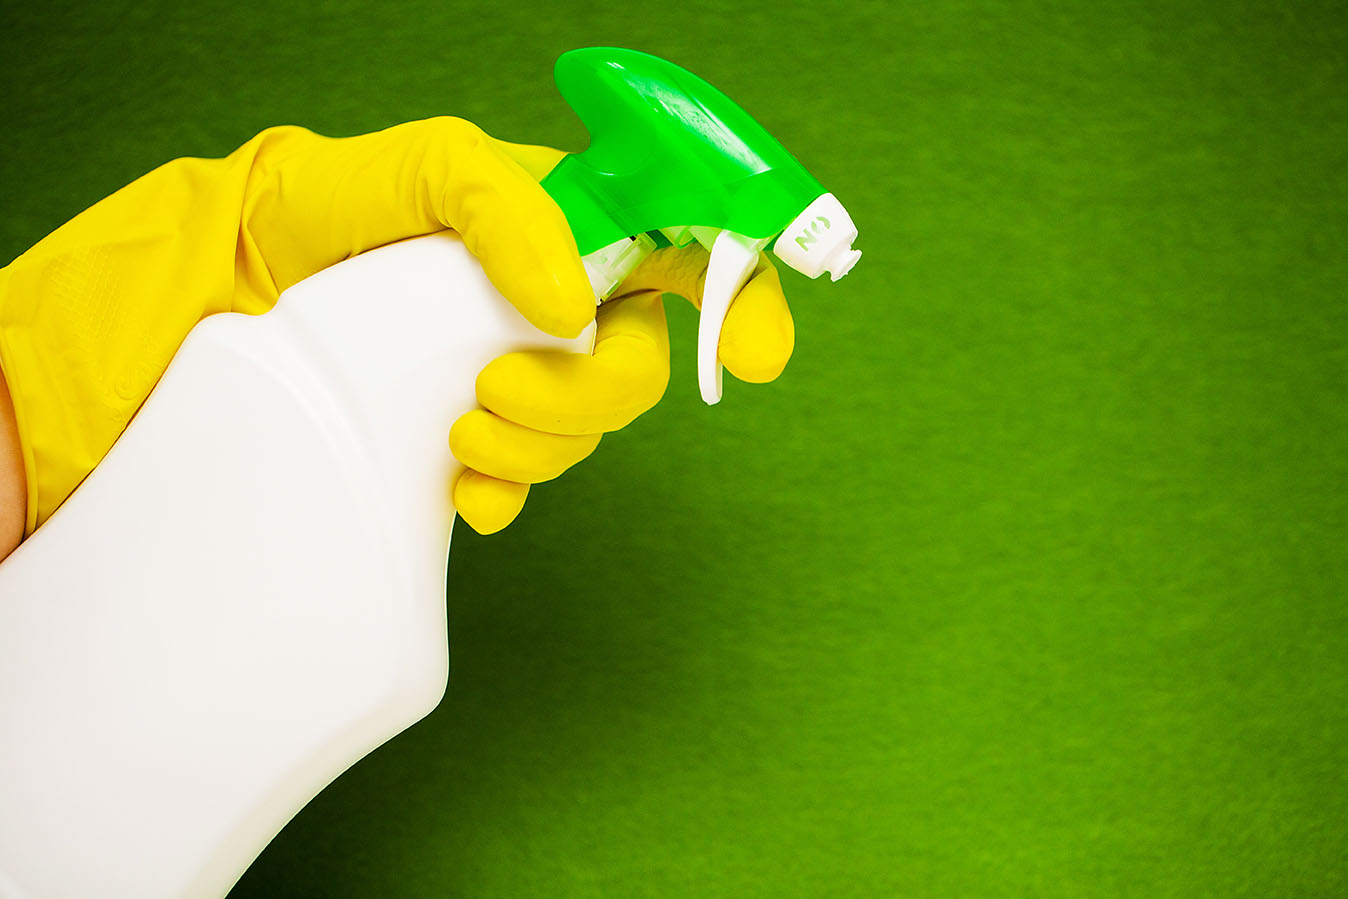 Green Cleaning Products That Actually Work